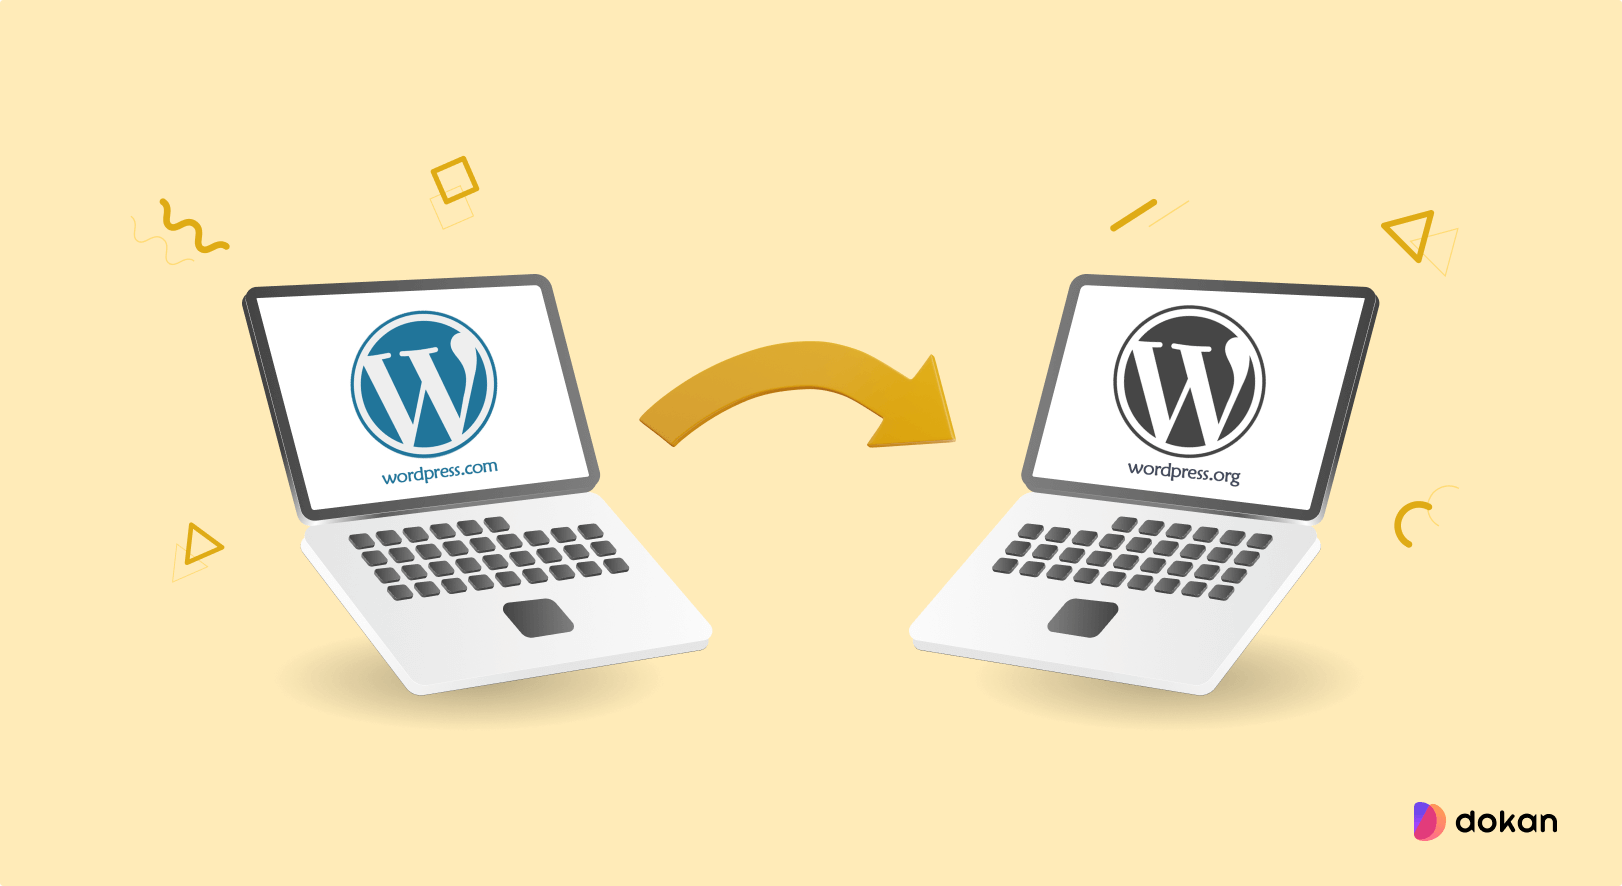 6 Easy Steps to Move Your Site from WordPress.com to WordPress.org